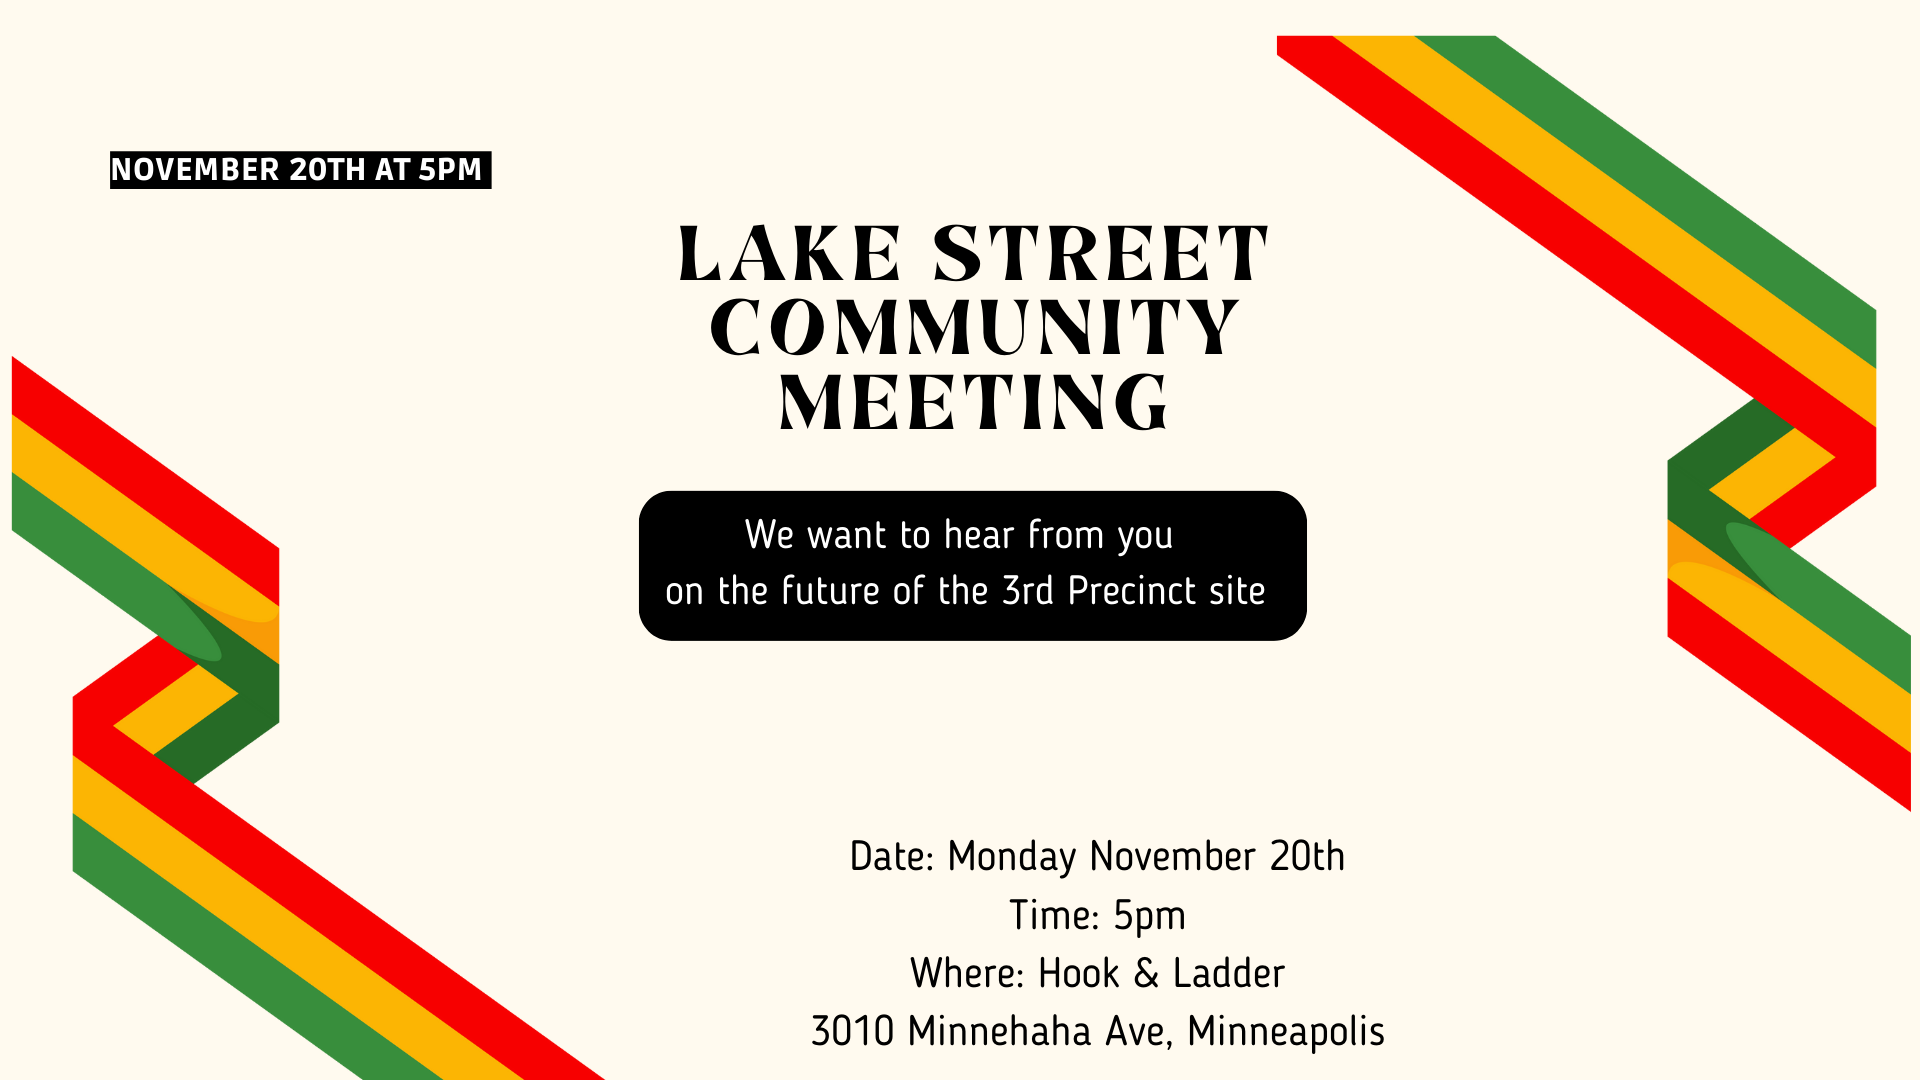 Date: Monday, November 20th Time: 5-7pm Location: Hook and Ladder Theater